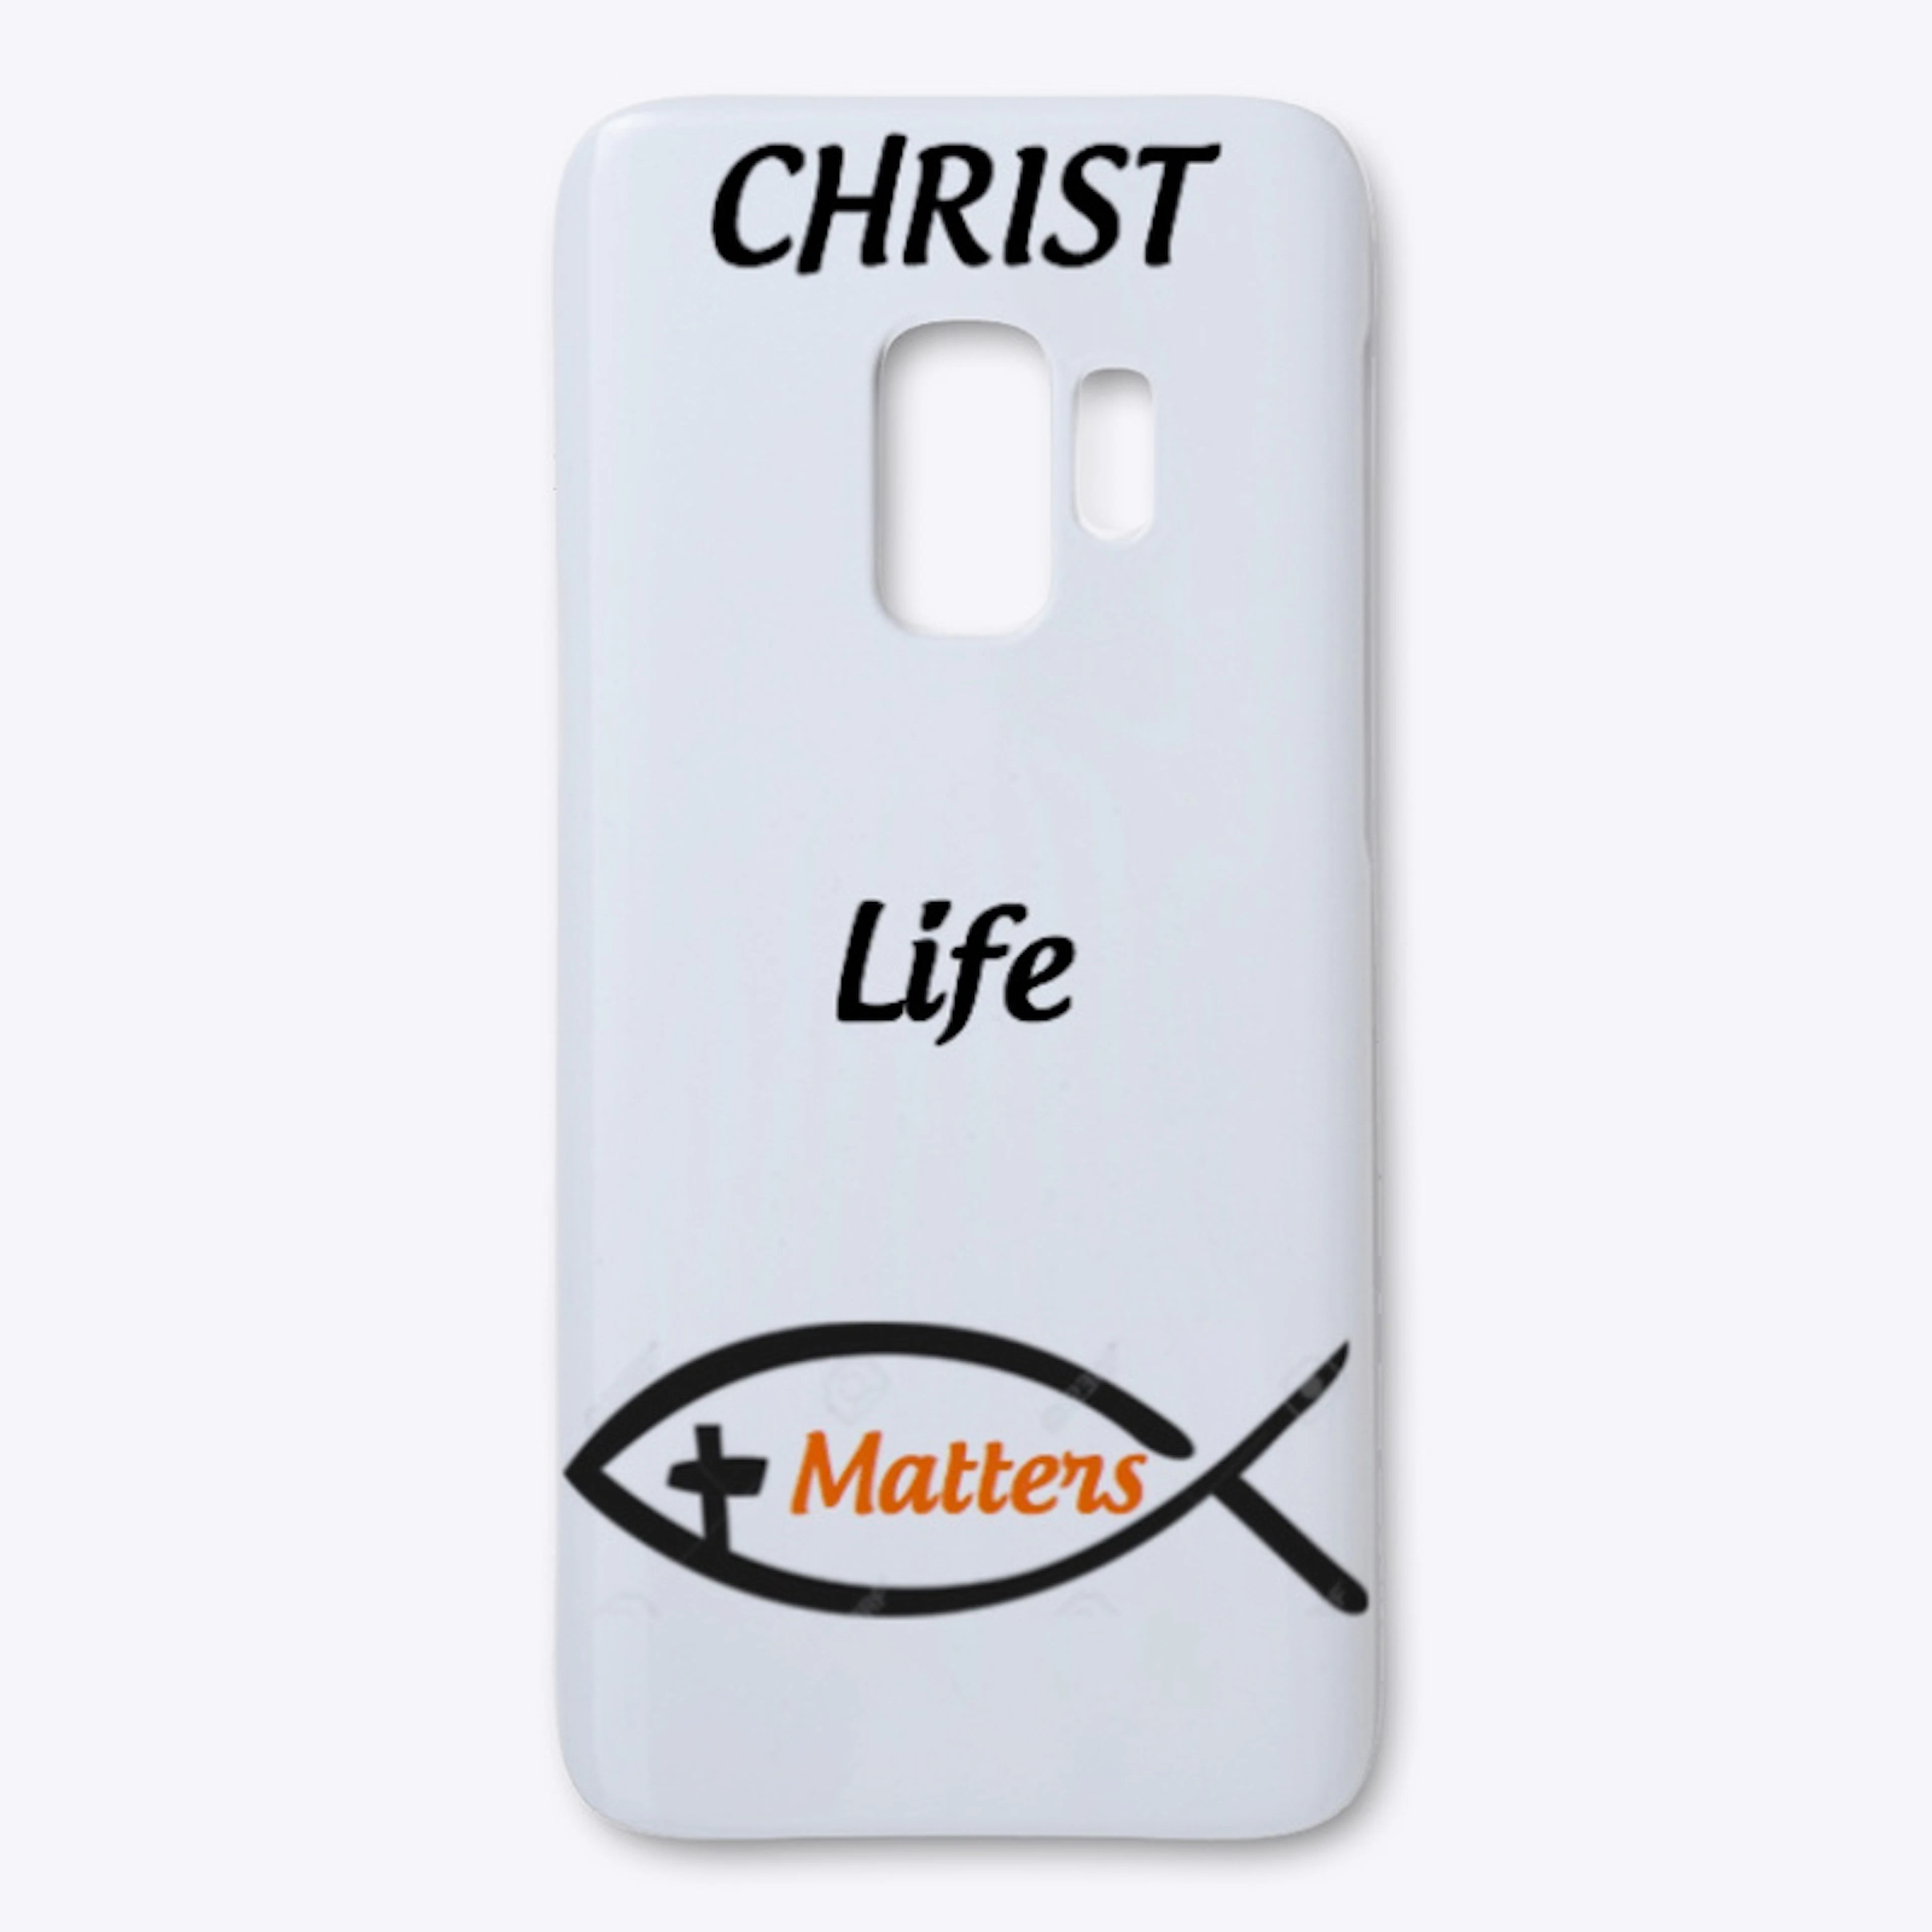 CHRISTLifeMatters PHONE CASES AND BAGS 